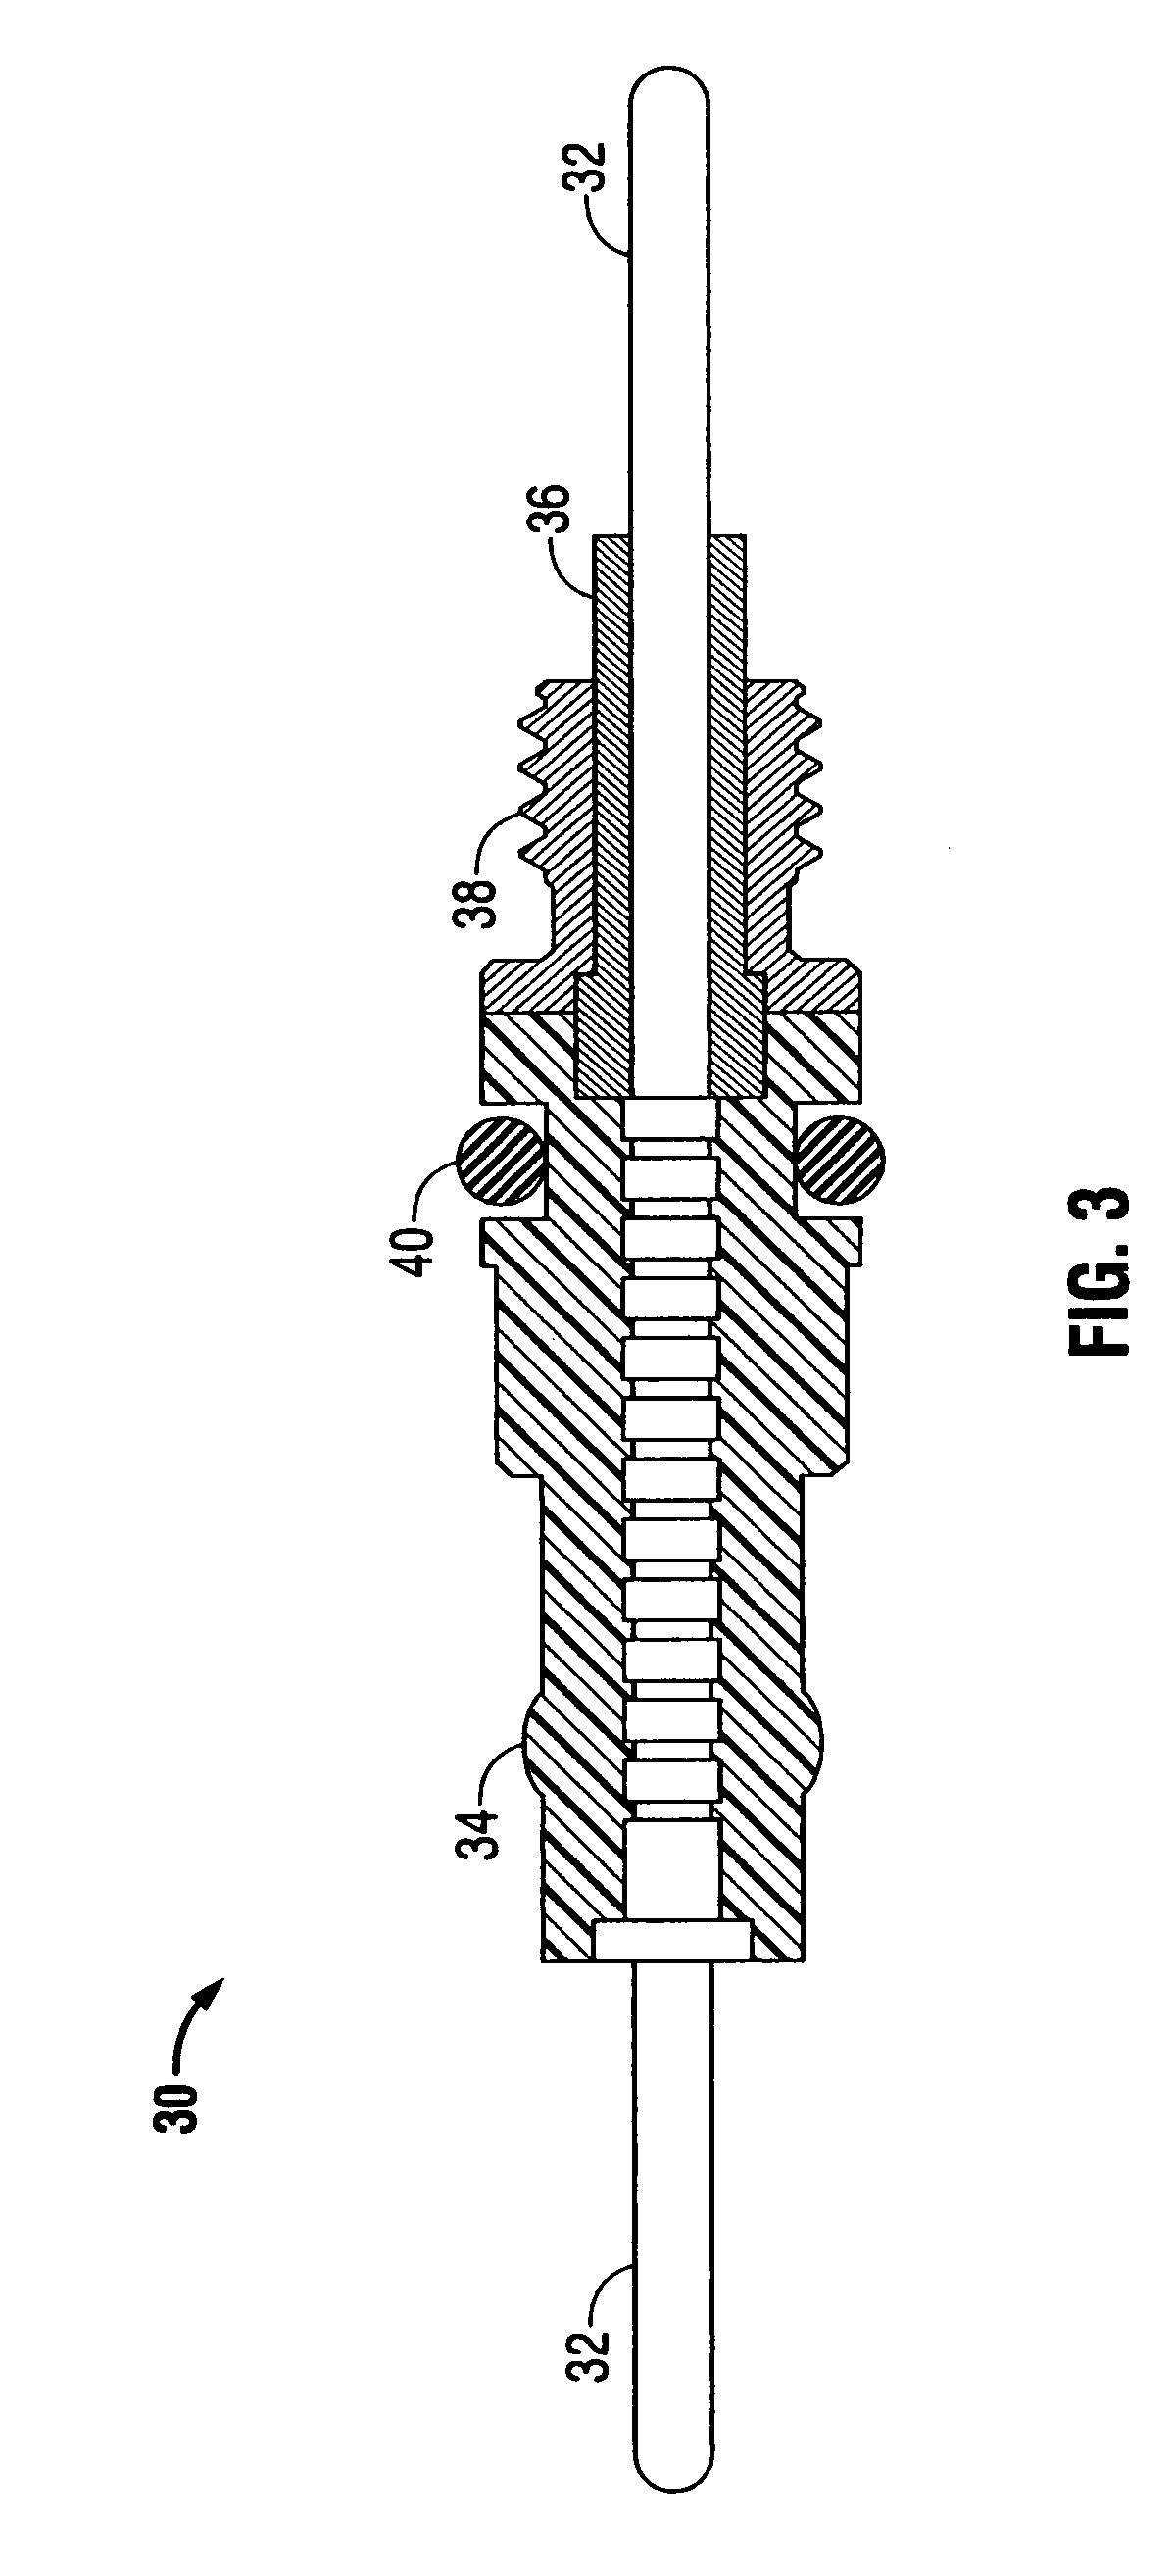 Electrical connectors and sensors for use in high temperature, high pressure oil and gas wells